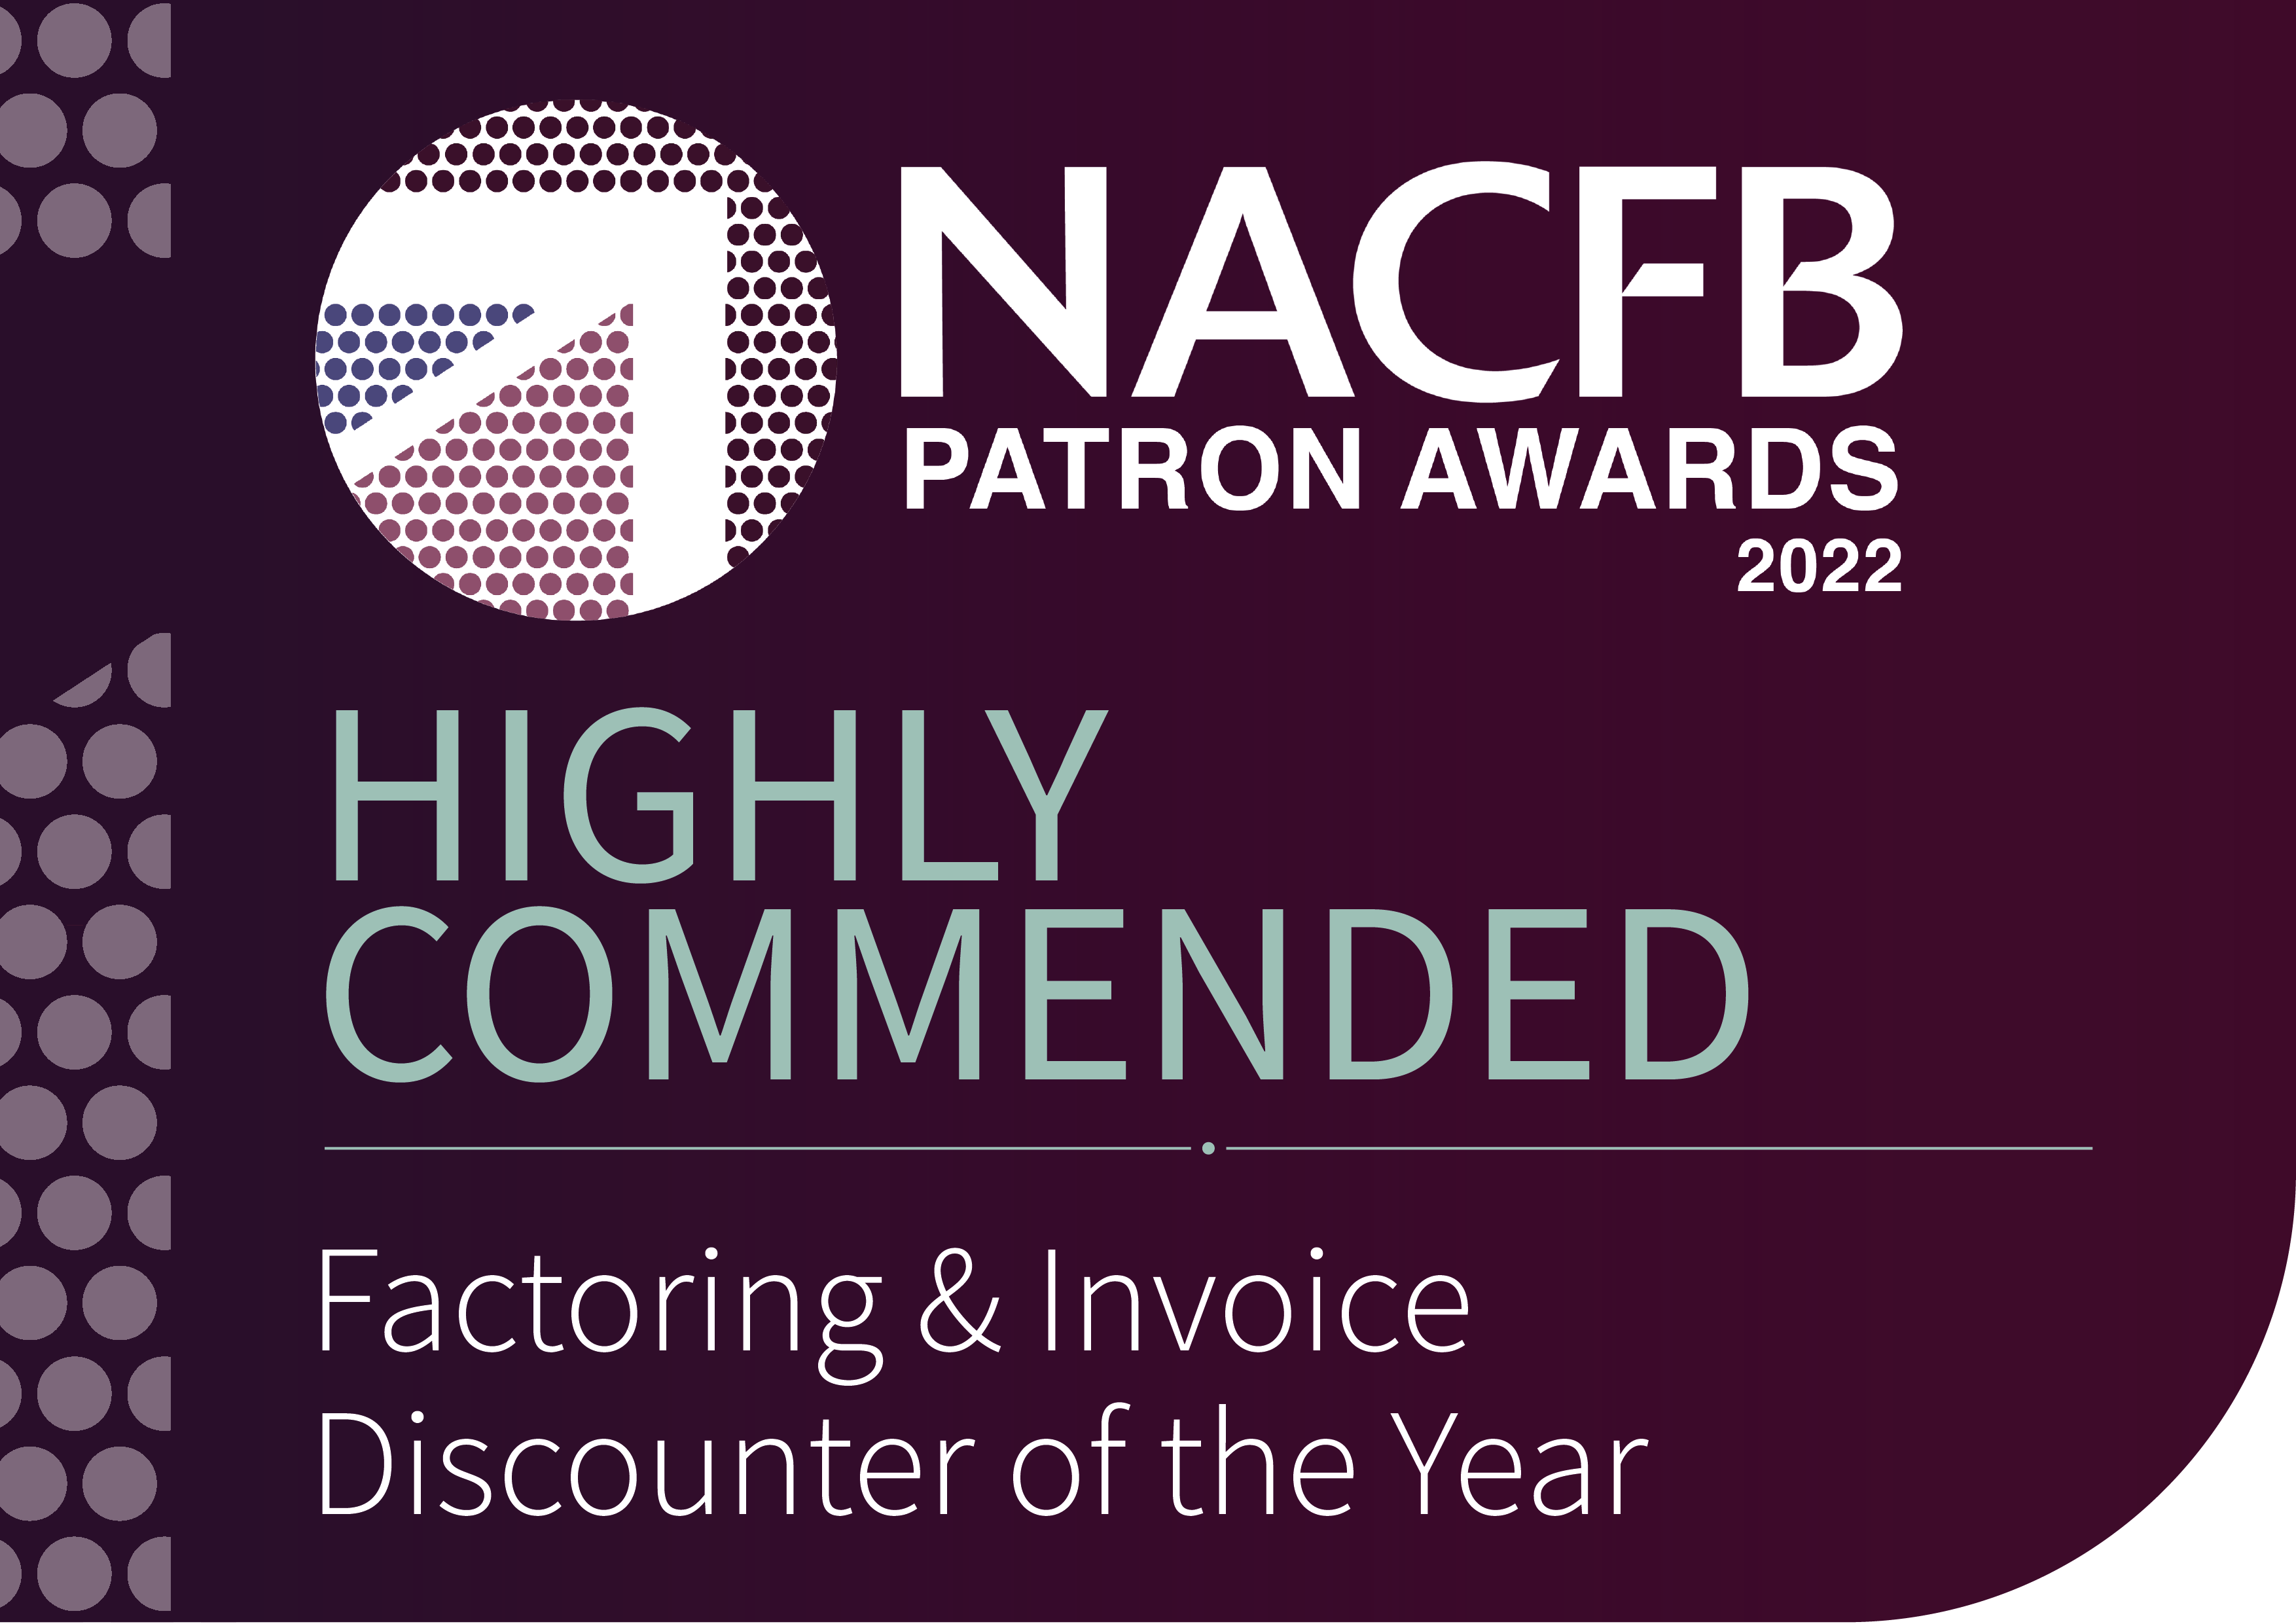 patron-awards-highly-commended-factoring-invoice-discounter-of-the-year (1)